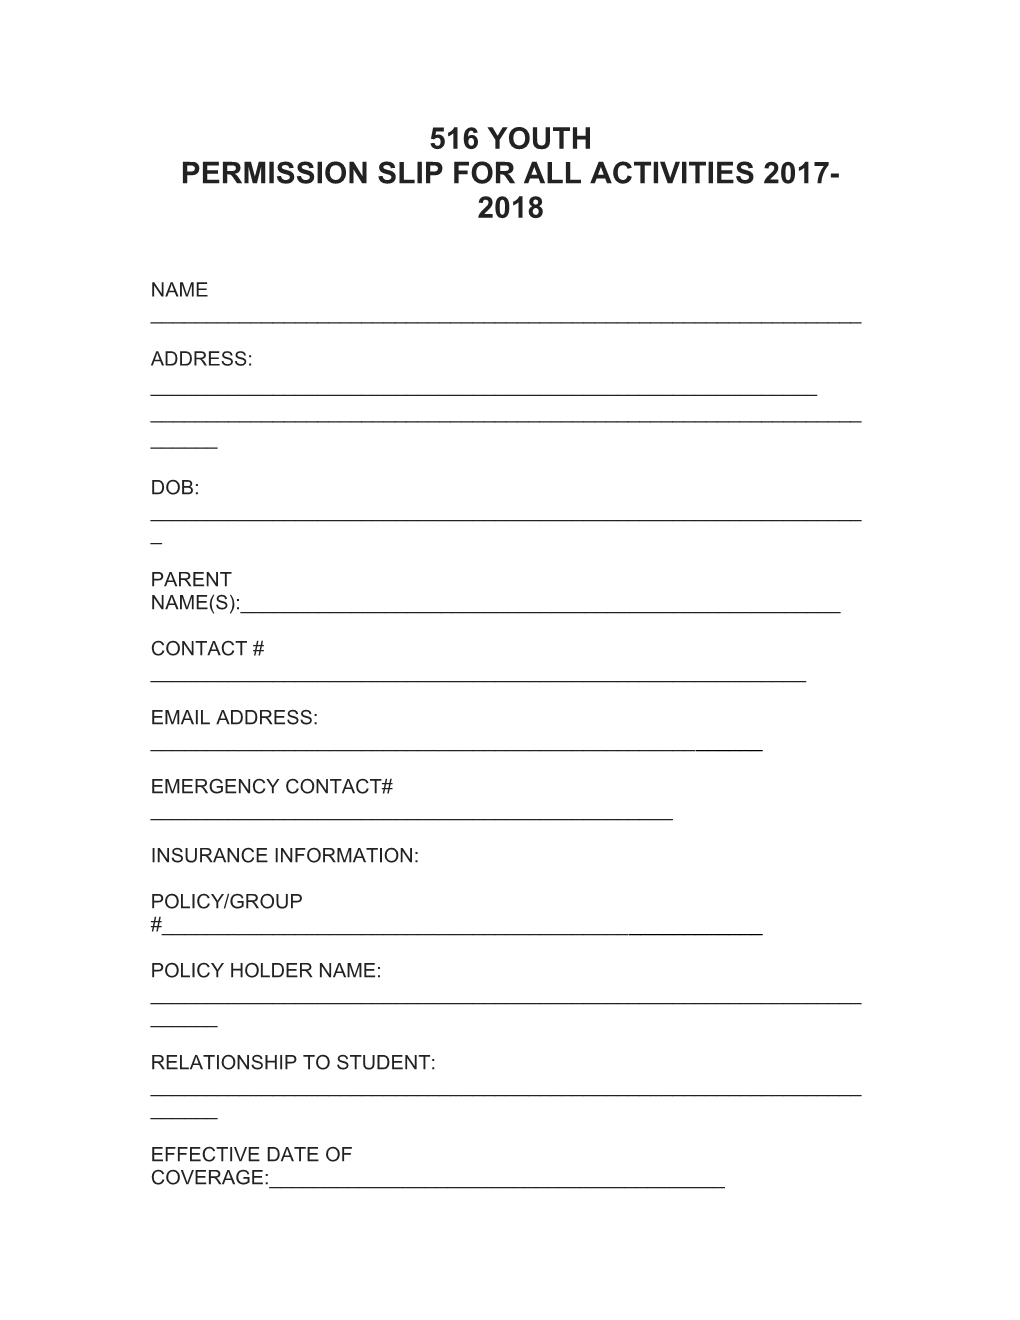 Permission Slip for All Activities 2017-2018